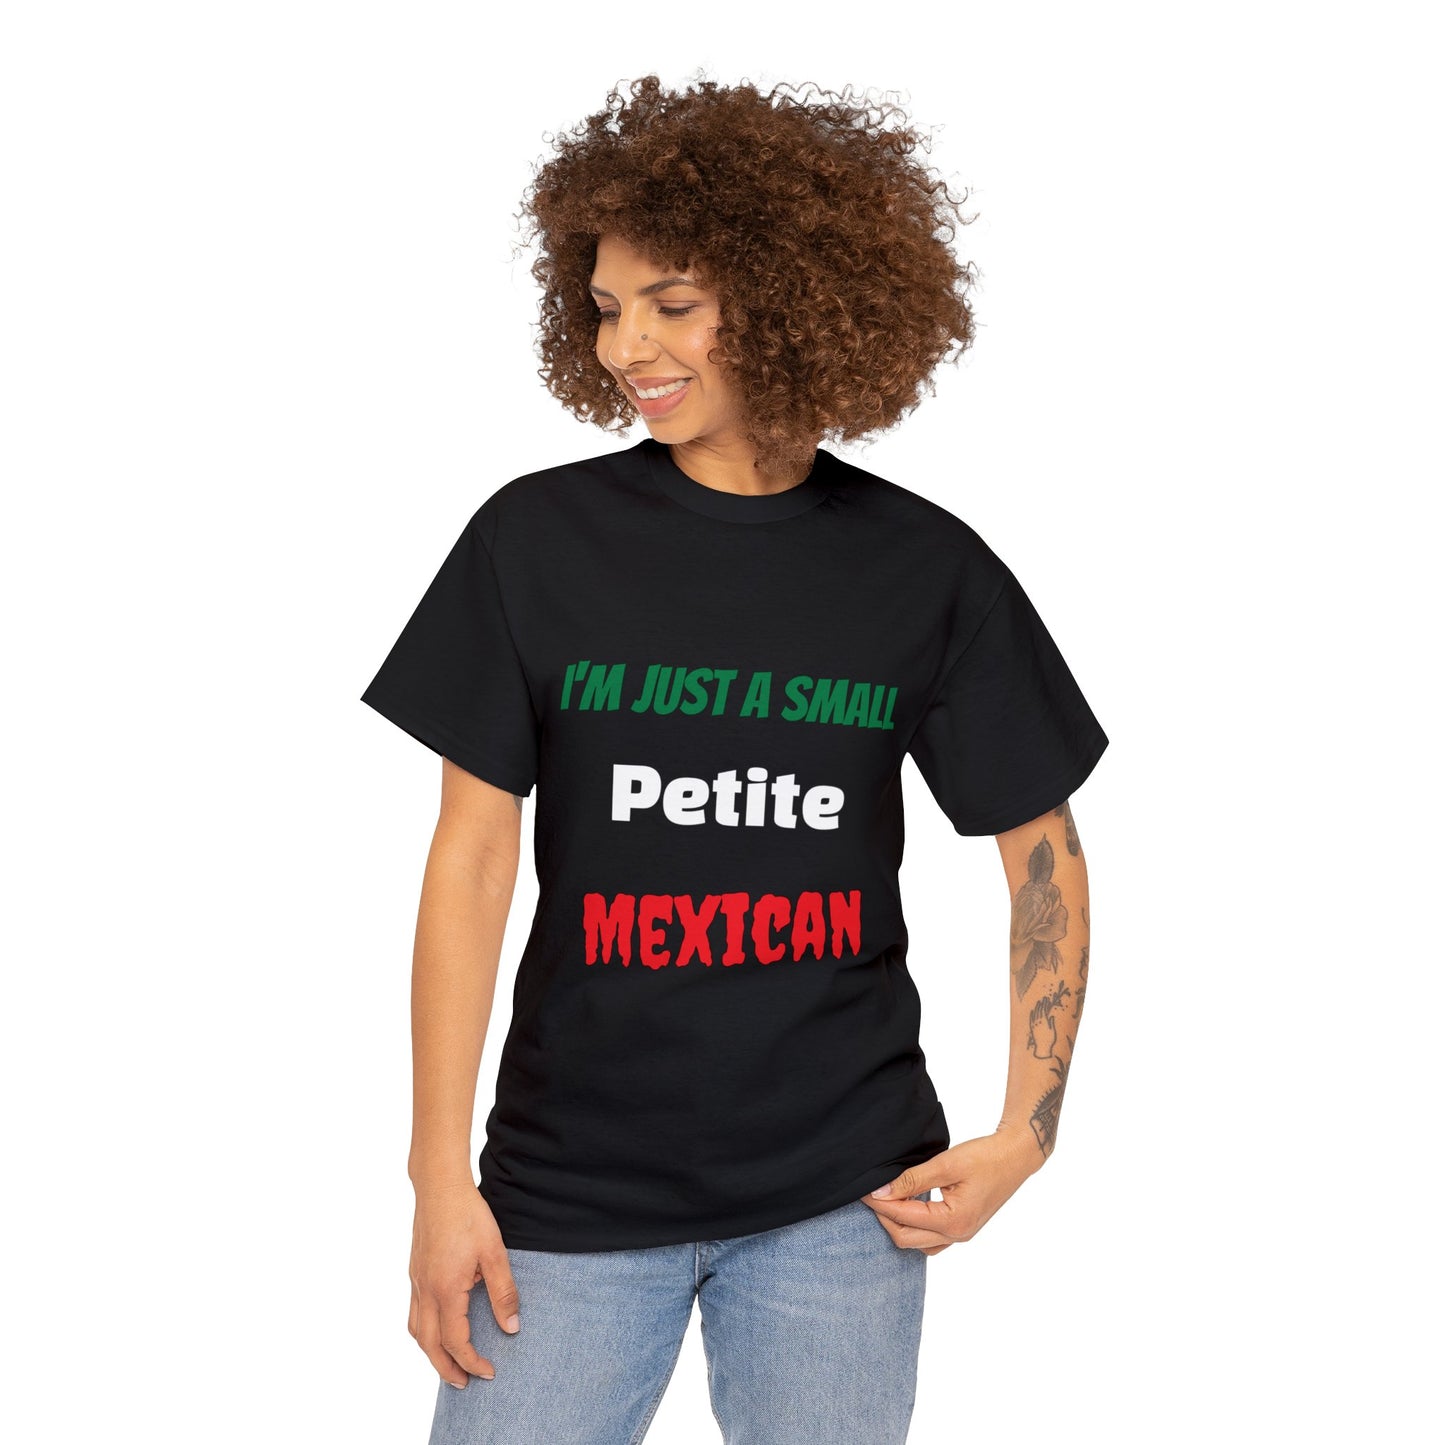 Small Petite Mexican shirt